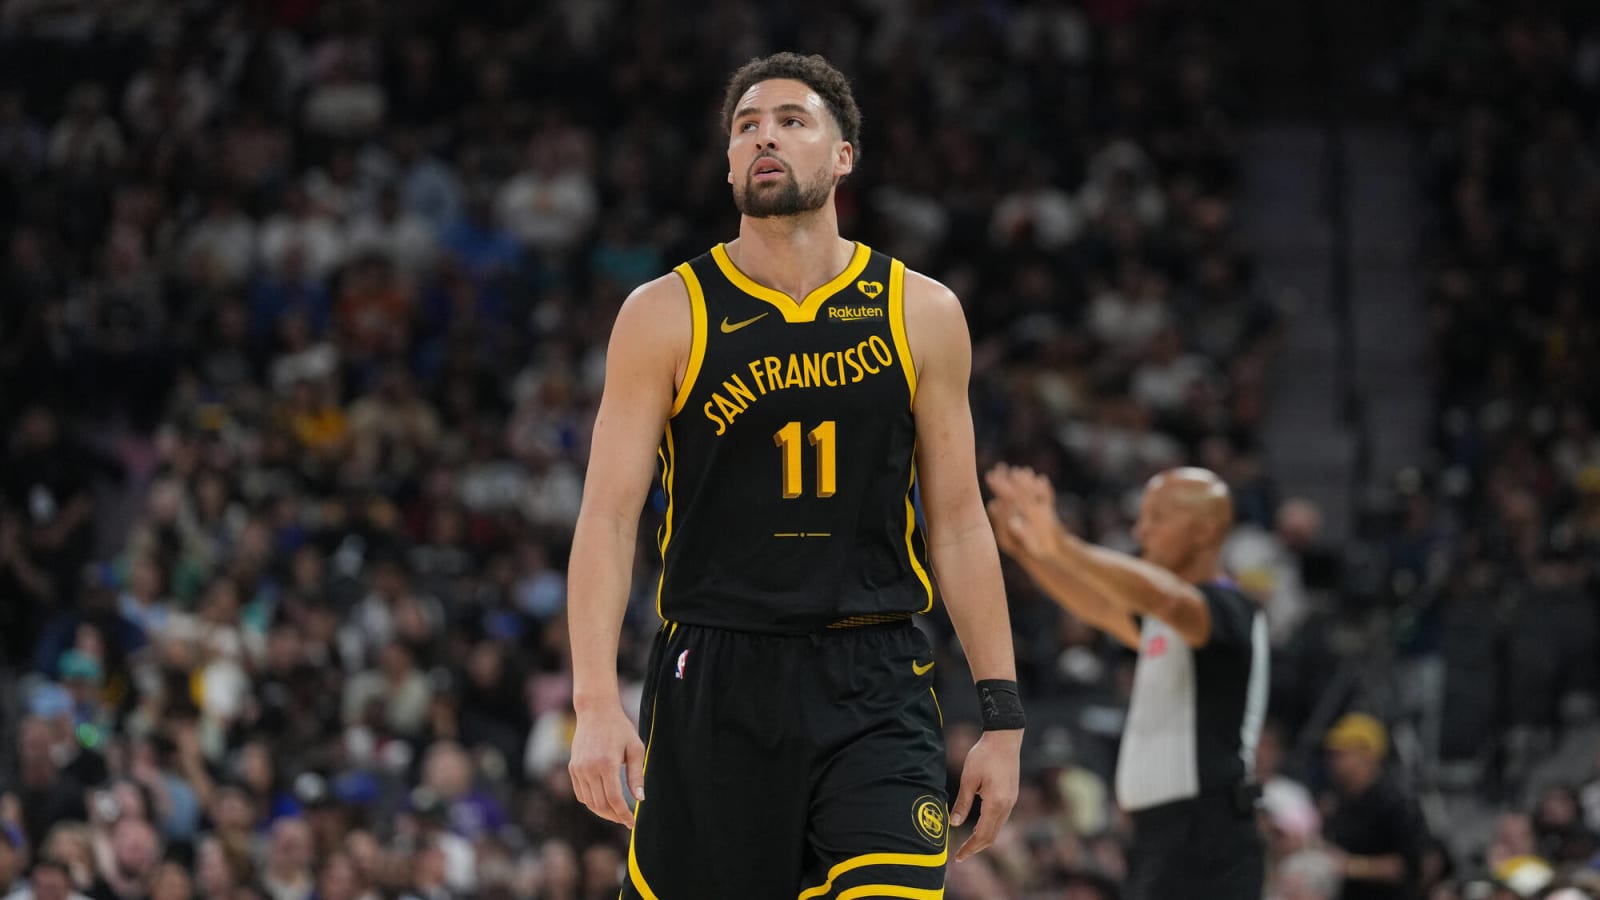 'That’s pretty lame…' Klay Thompson fires back at Tari Eason for pre-game taunts as Warriors destroy Houston Rockets